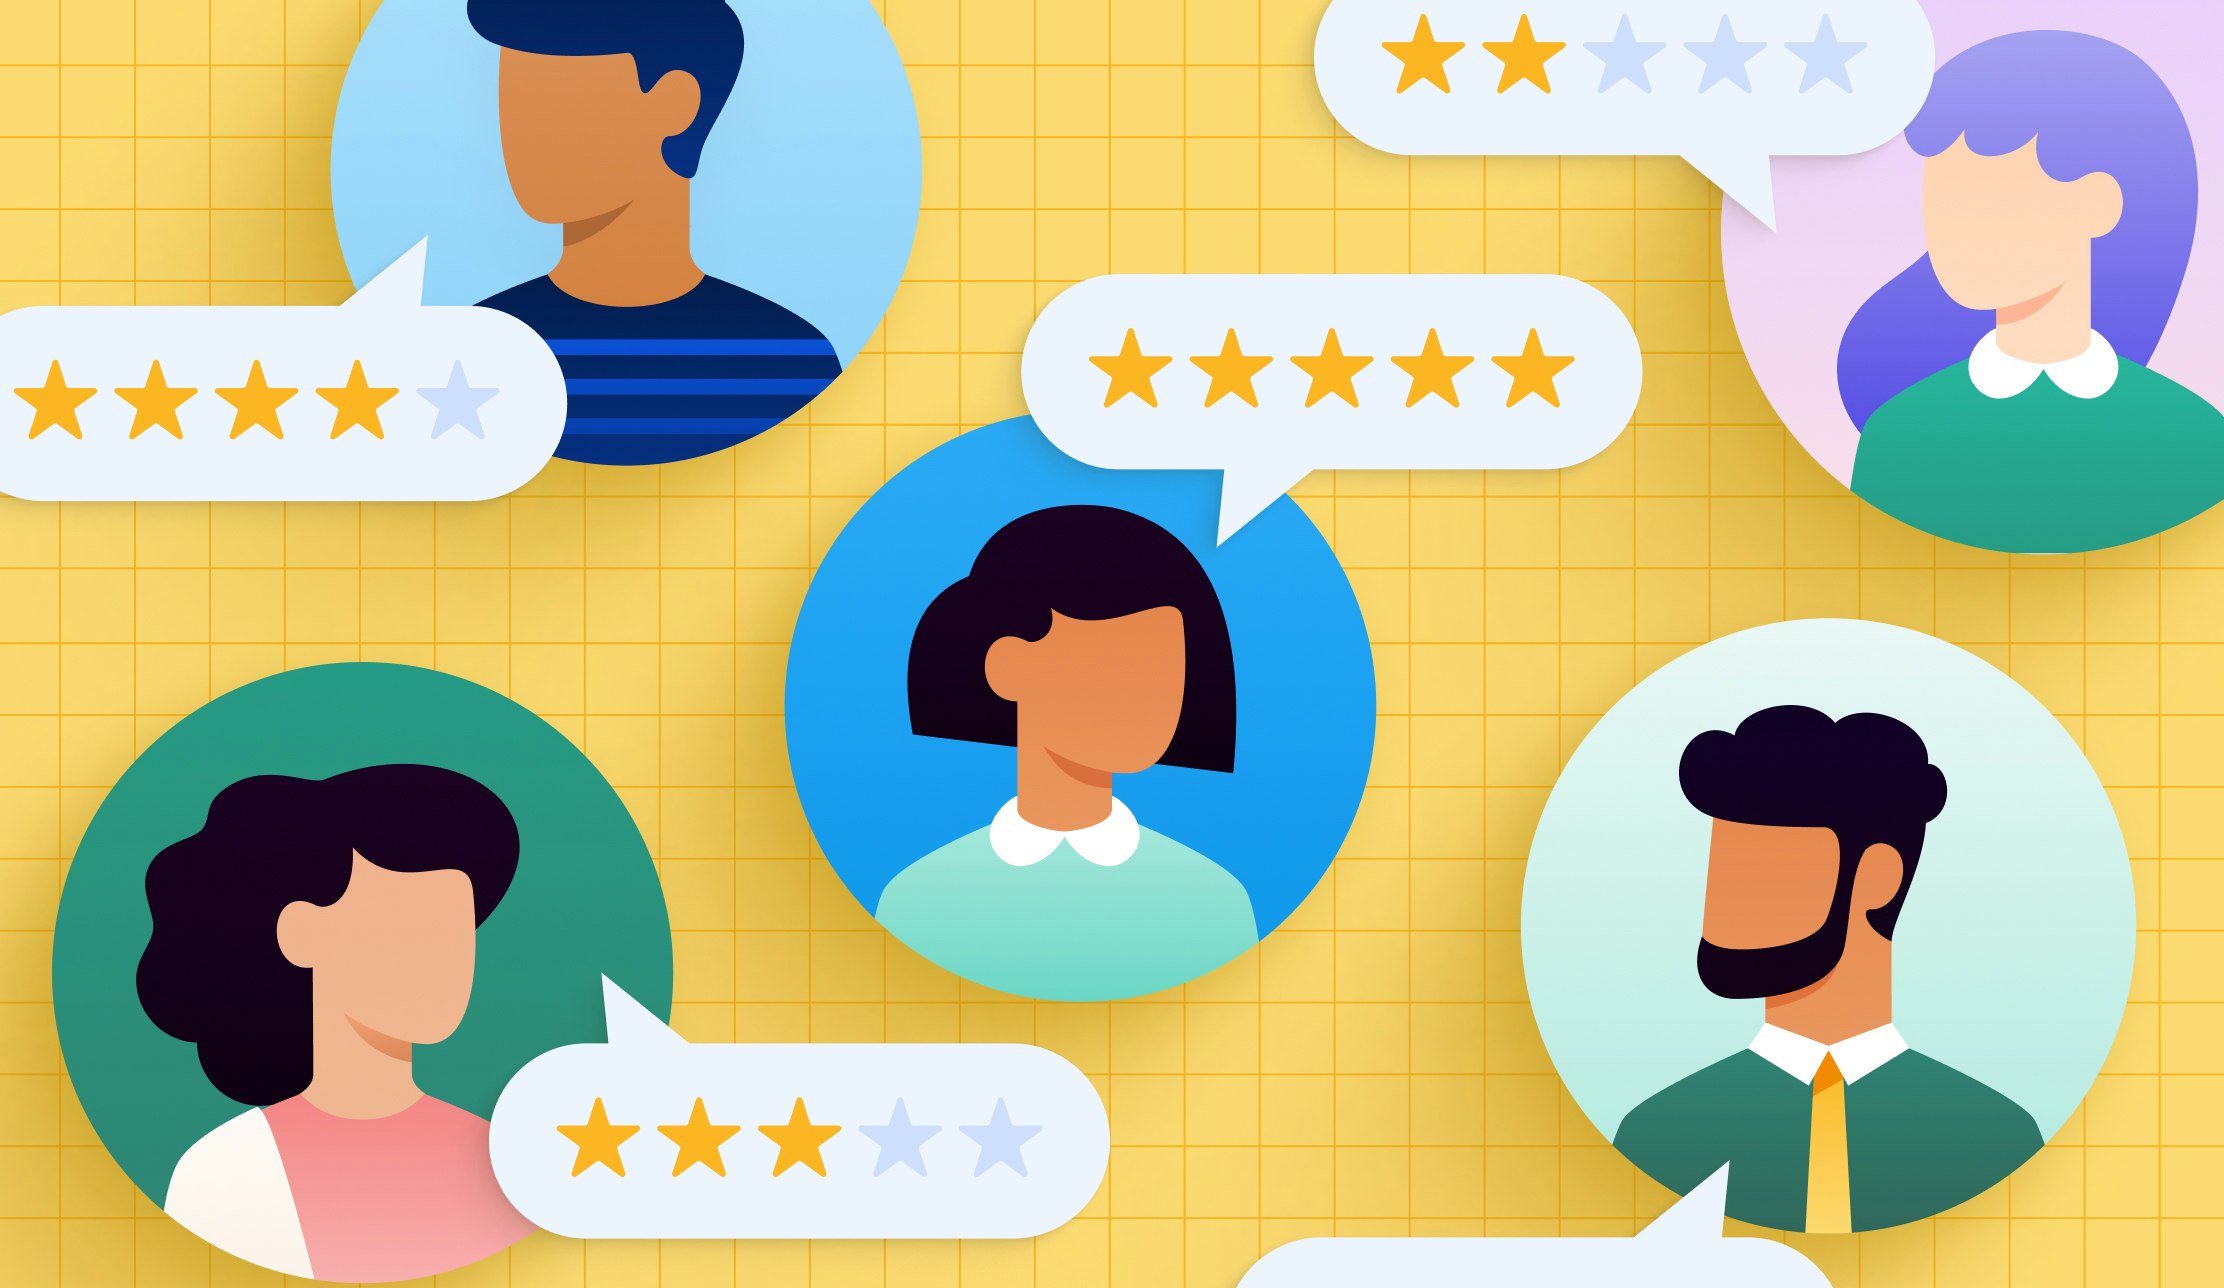 How poor delivery experience impacts online customer behavior: A group of illustrated profile pictures with speech bubbles showing star reviews